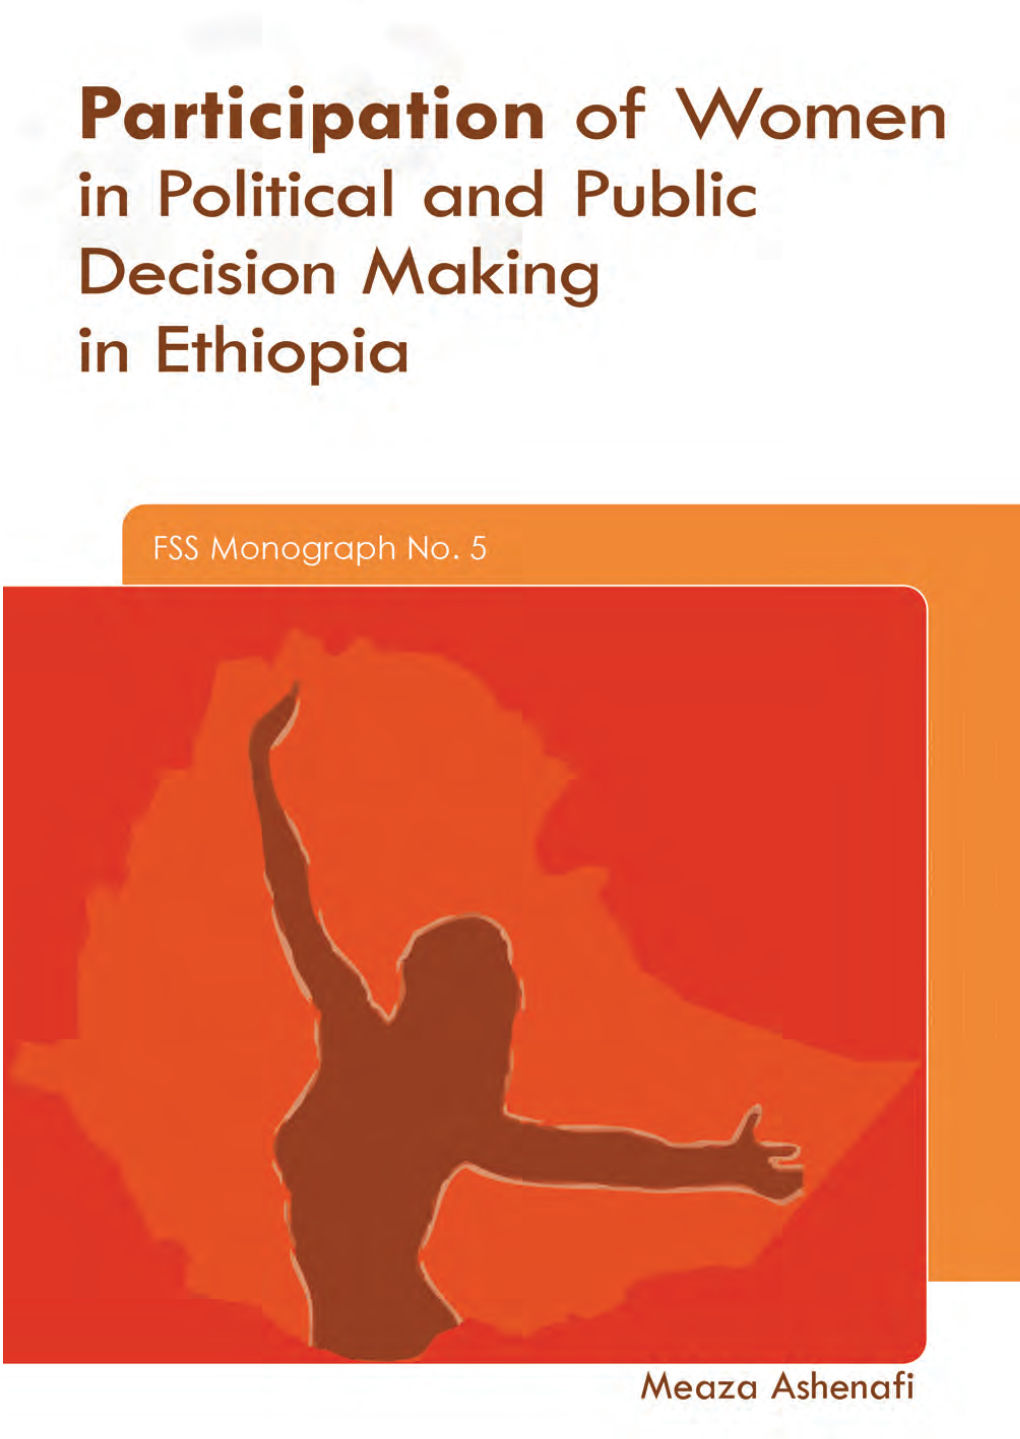 Participation of Women in Politics and Public Decision Making in Ethiopia